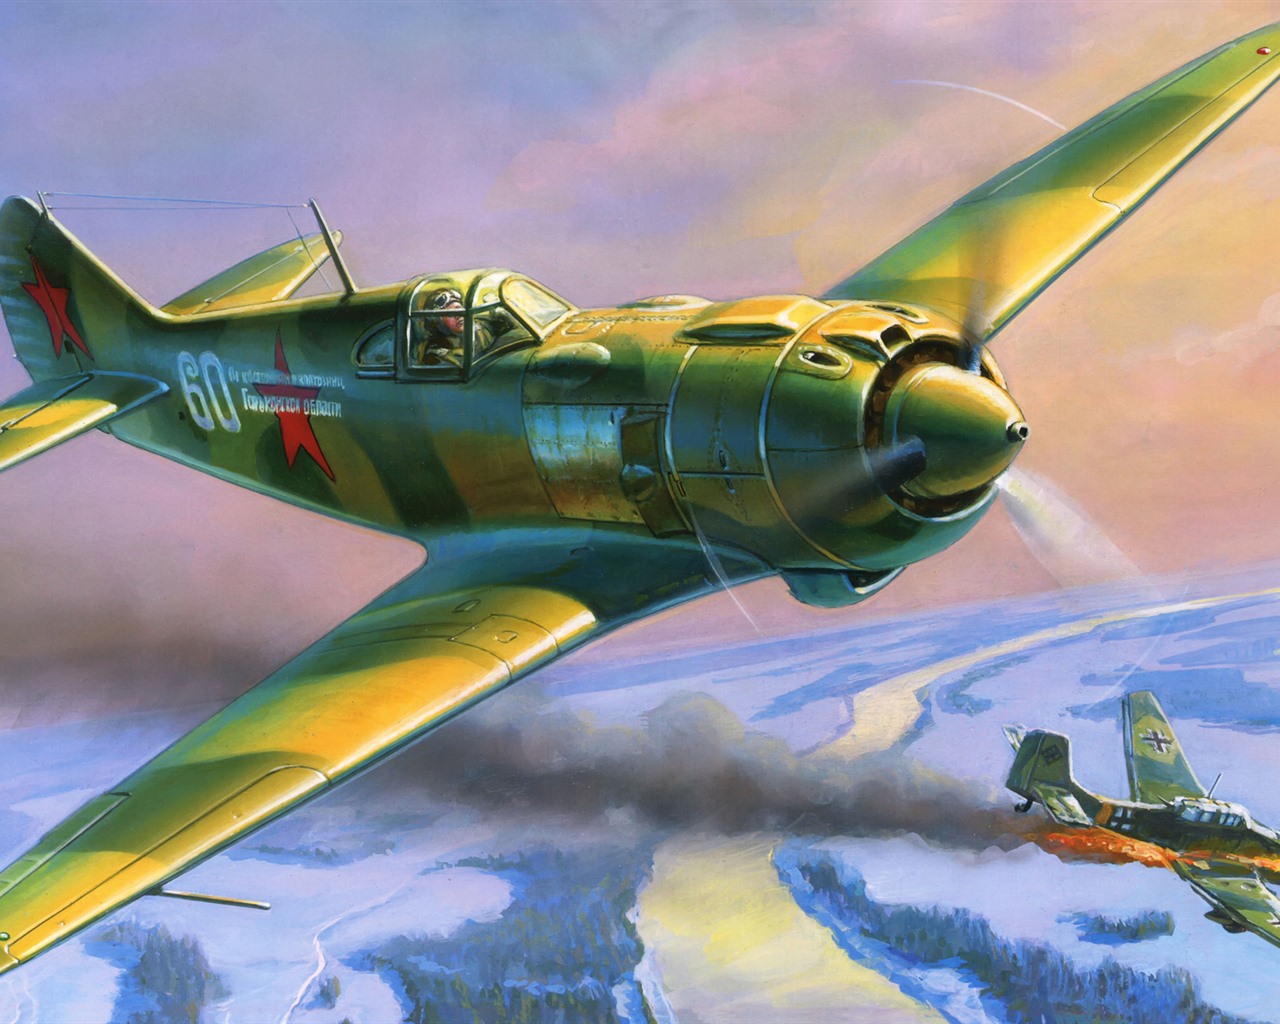 Military aircraft flight exquisite painting wallpapers #20 - 1280x1024